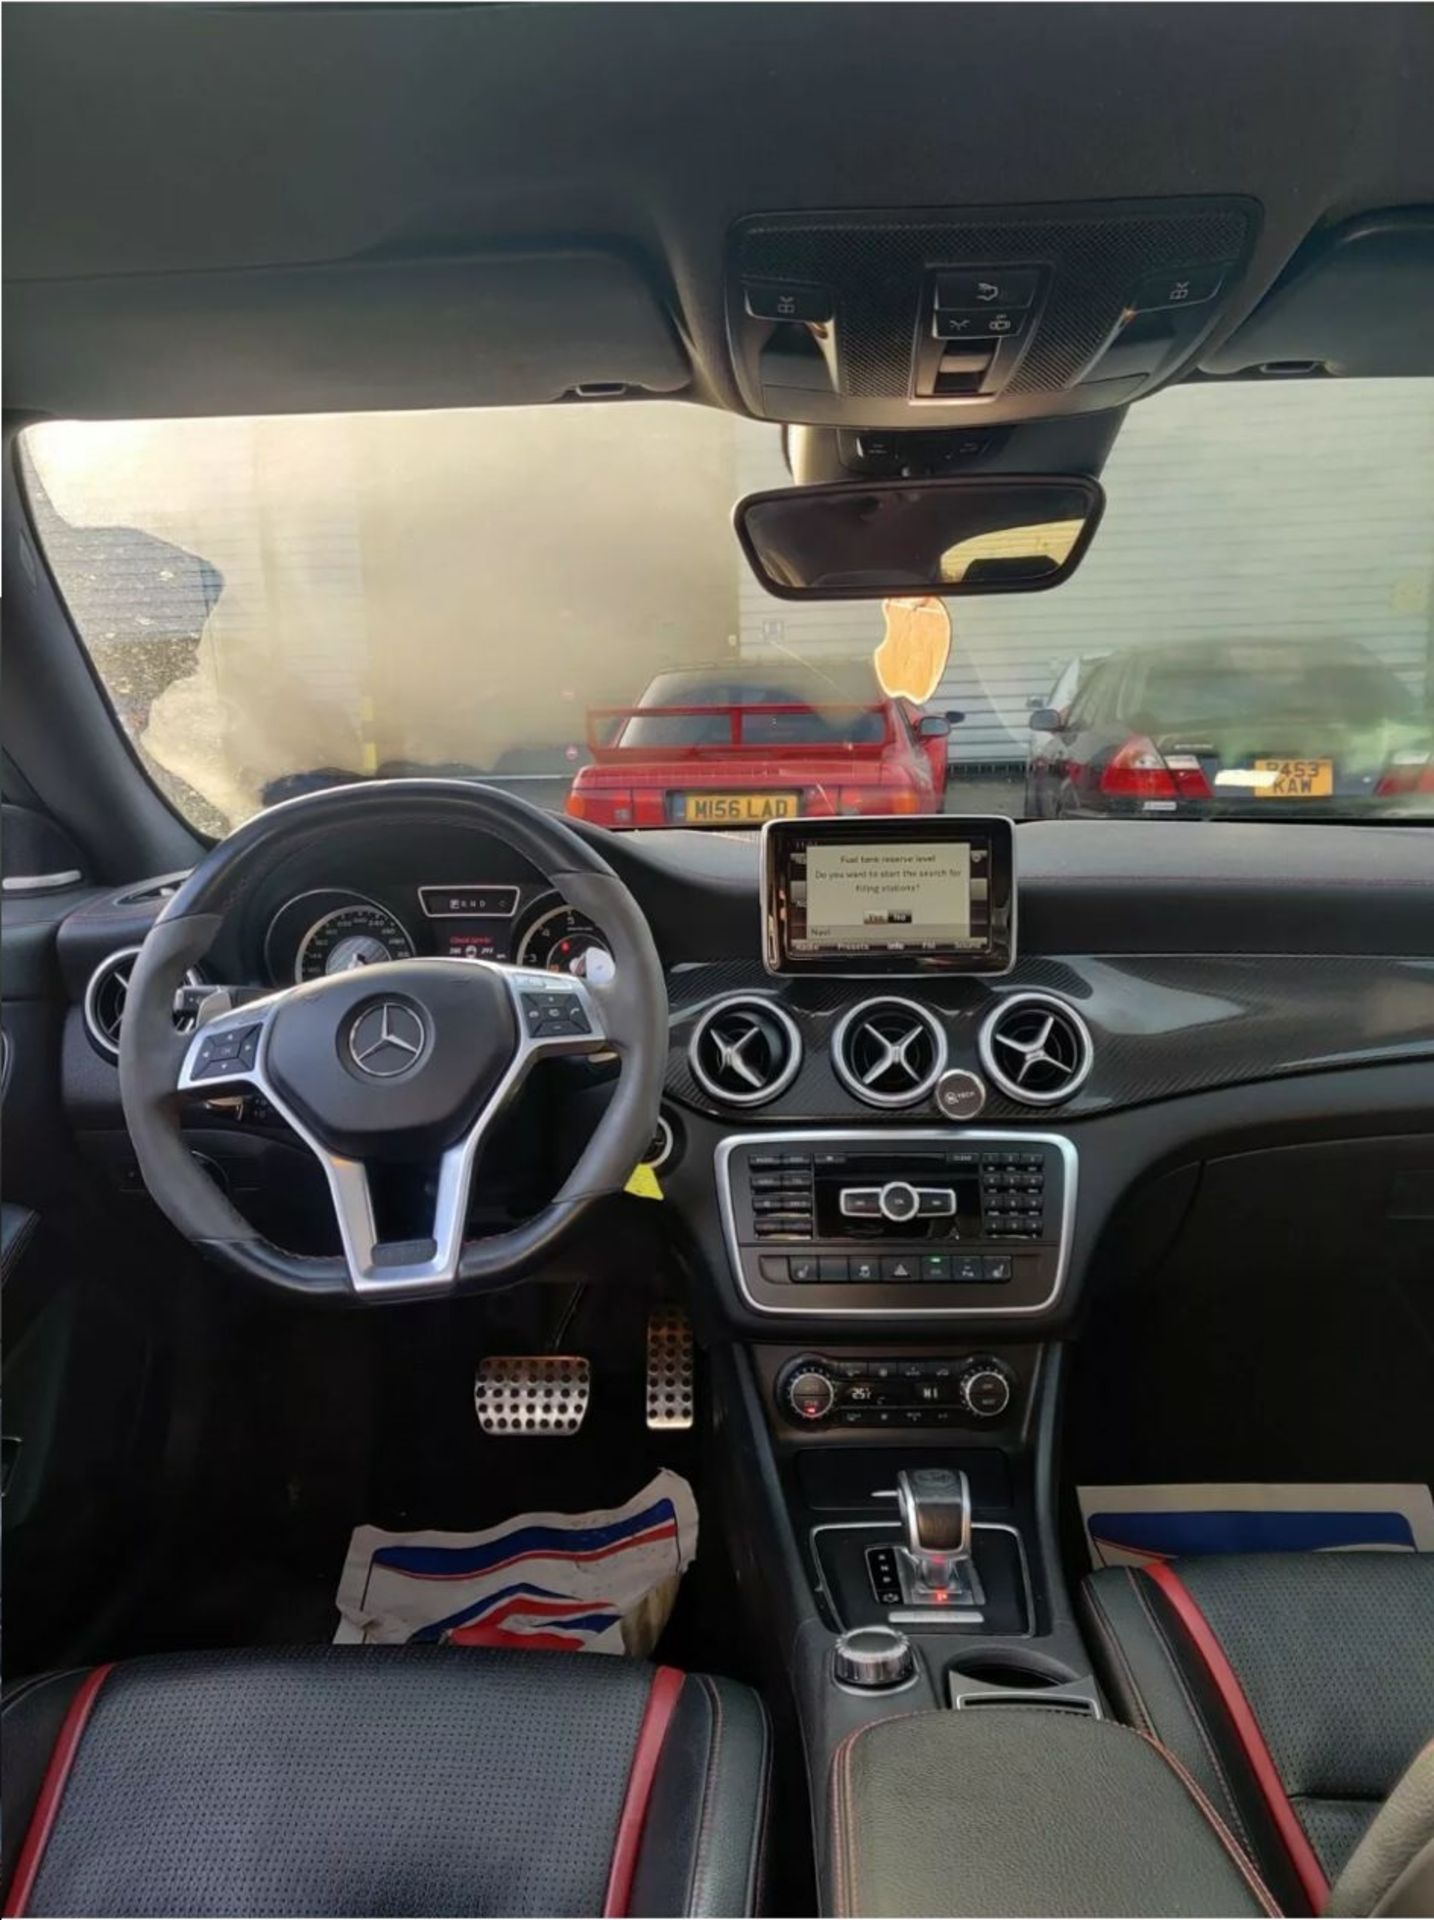 MERCEDES CLA45 AMG TOP SPEC EDITION ONE LIMITED EDITION 1 OF 500, BUCKET SEATS LHD, 40K MILES - Image 9 of 9